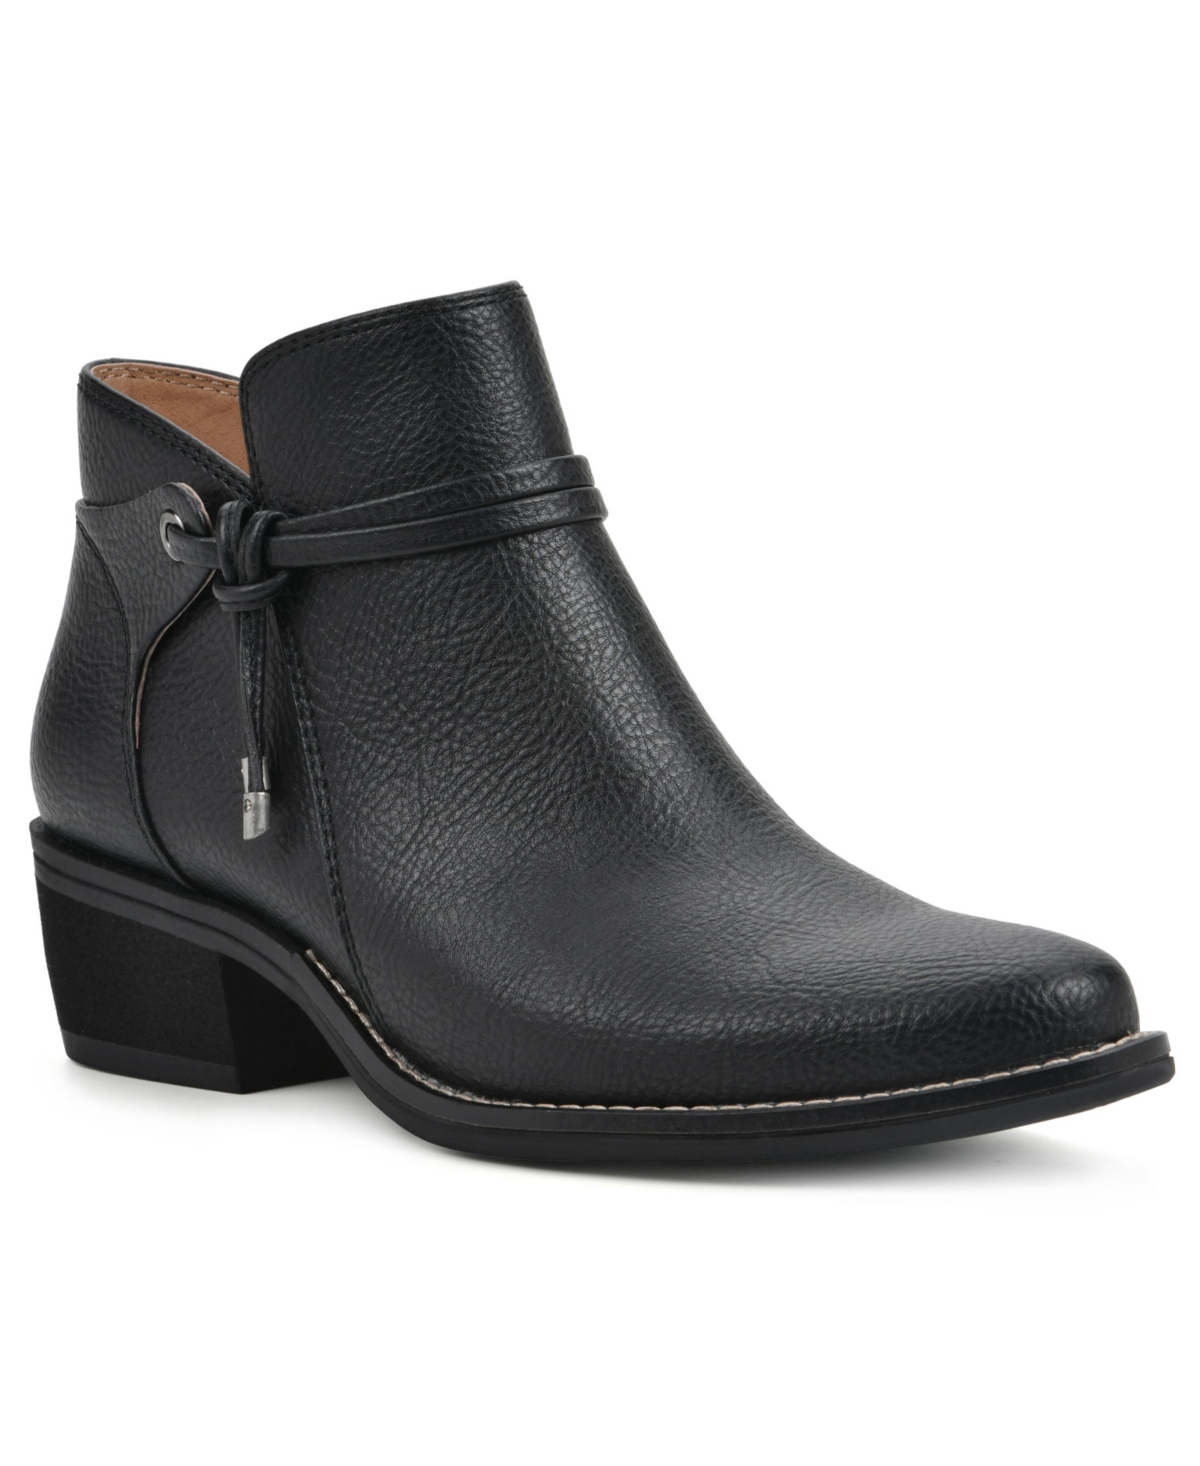 Women's Althorn Zipper Ankle Booties - Black Smooth